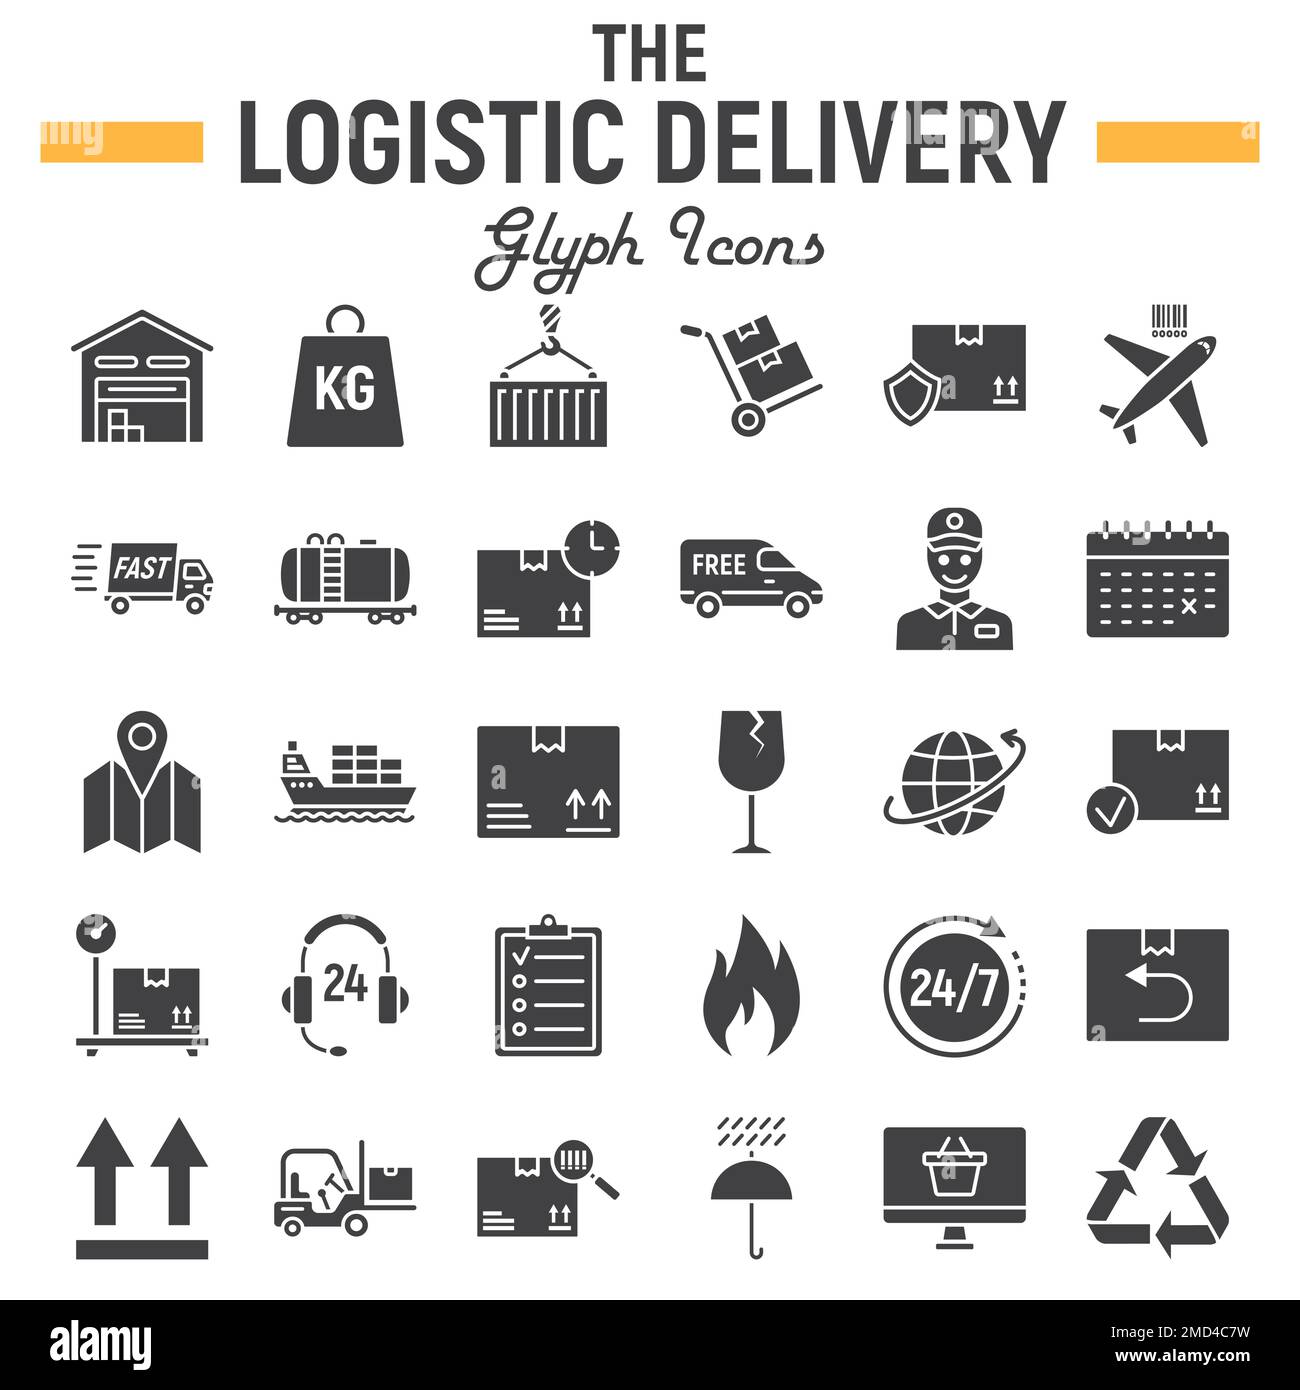 Logistic glyph icon set, Delivery symbols collection, vector sketches, logo illustrations, shipping signs solid pictograms package isolated on white background, eps 10. Stock Vector